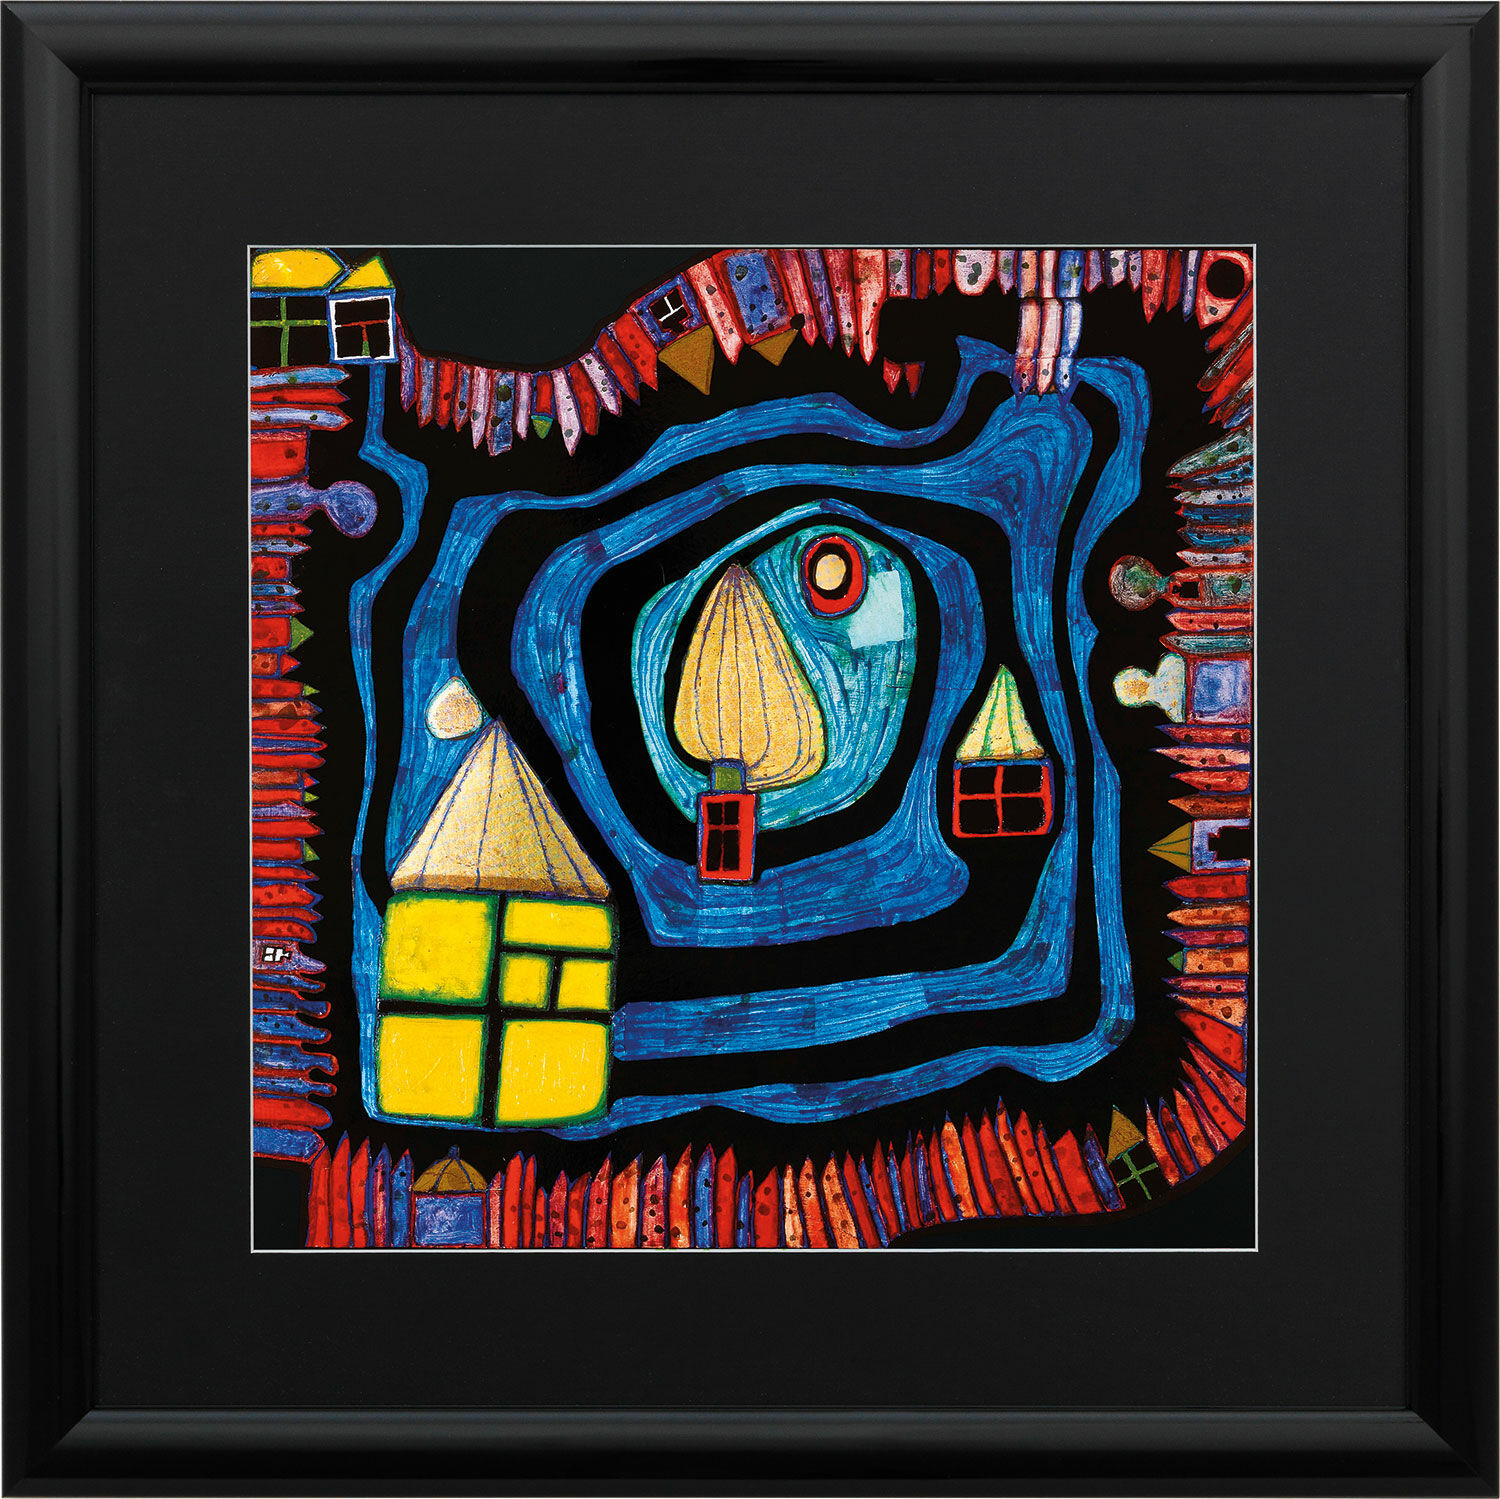 Picture "(808) End of the Waters", framed by Friedensreich Hundertwasser